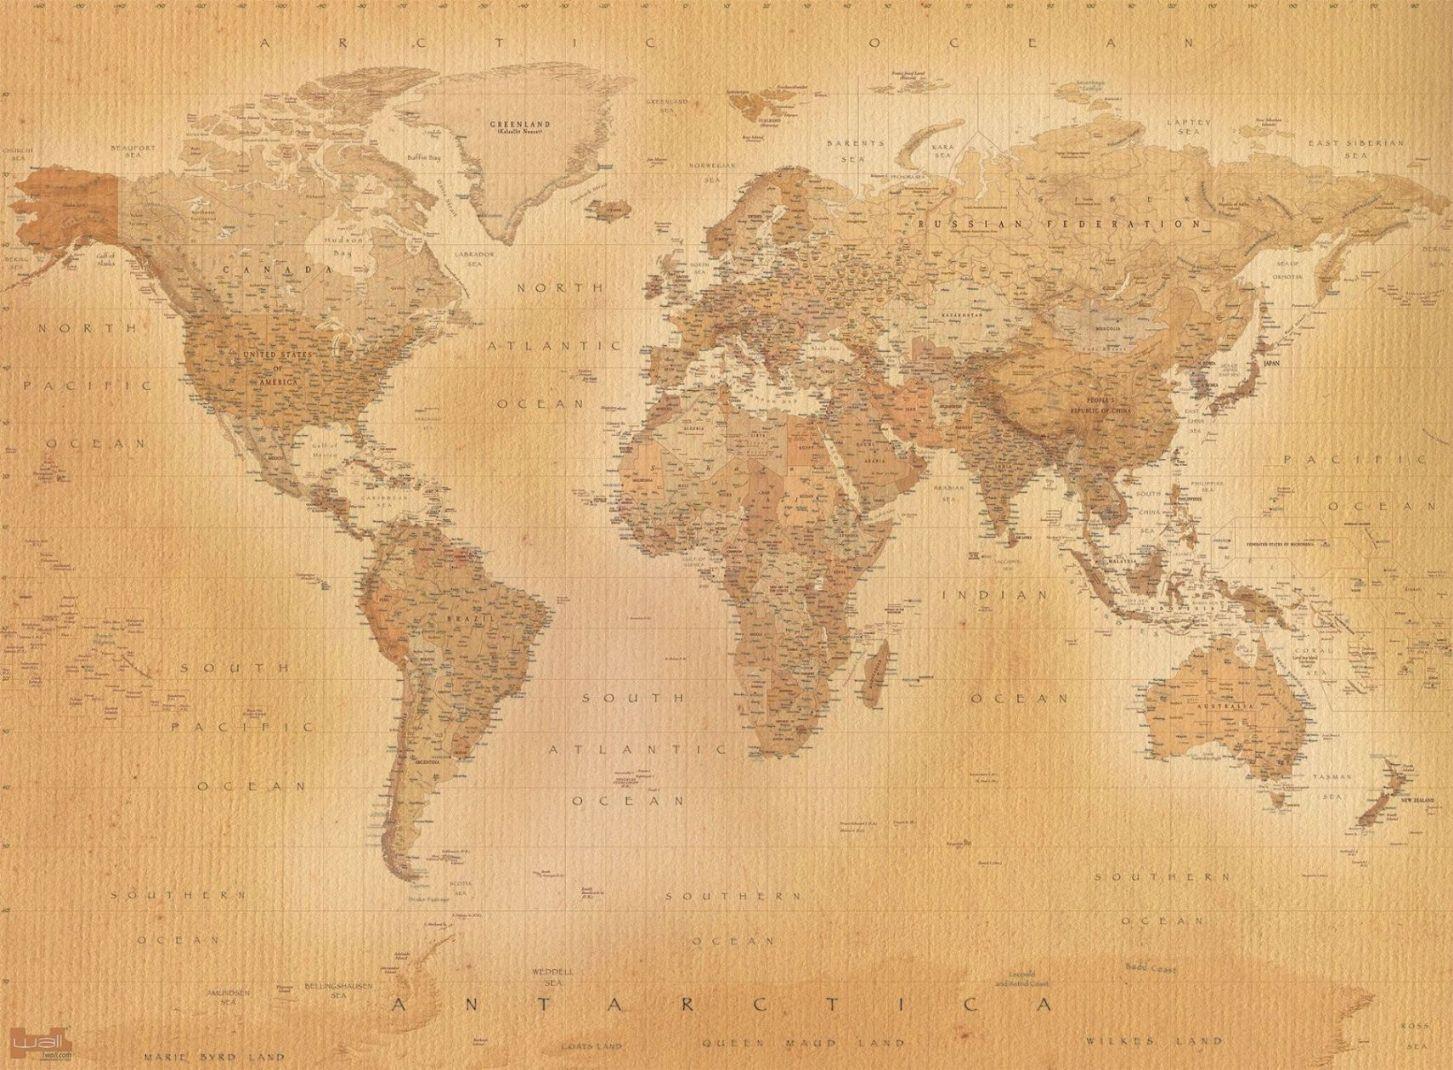 Details about Old style vintage World Map Wallpaper Wall Mural 2.32m x 3.15m New (FREE P P)